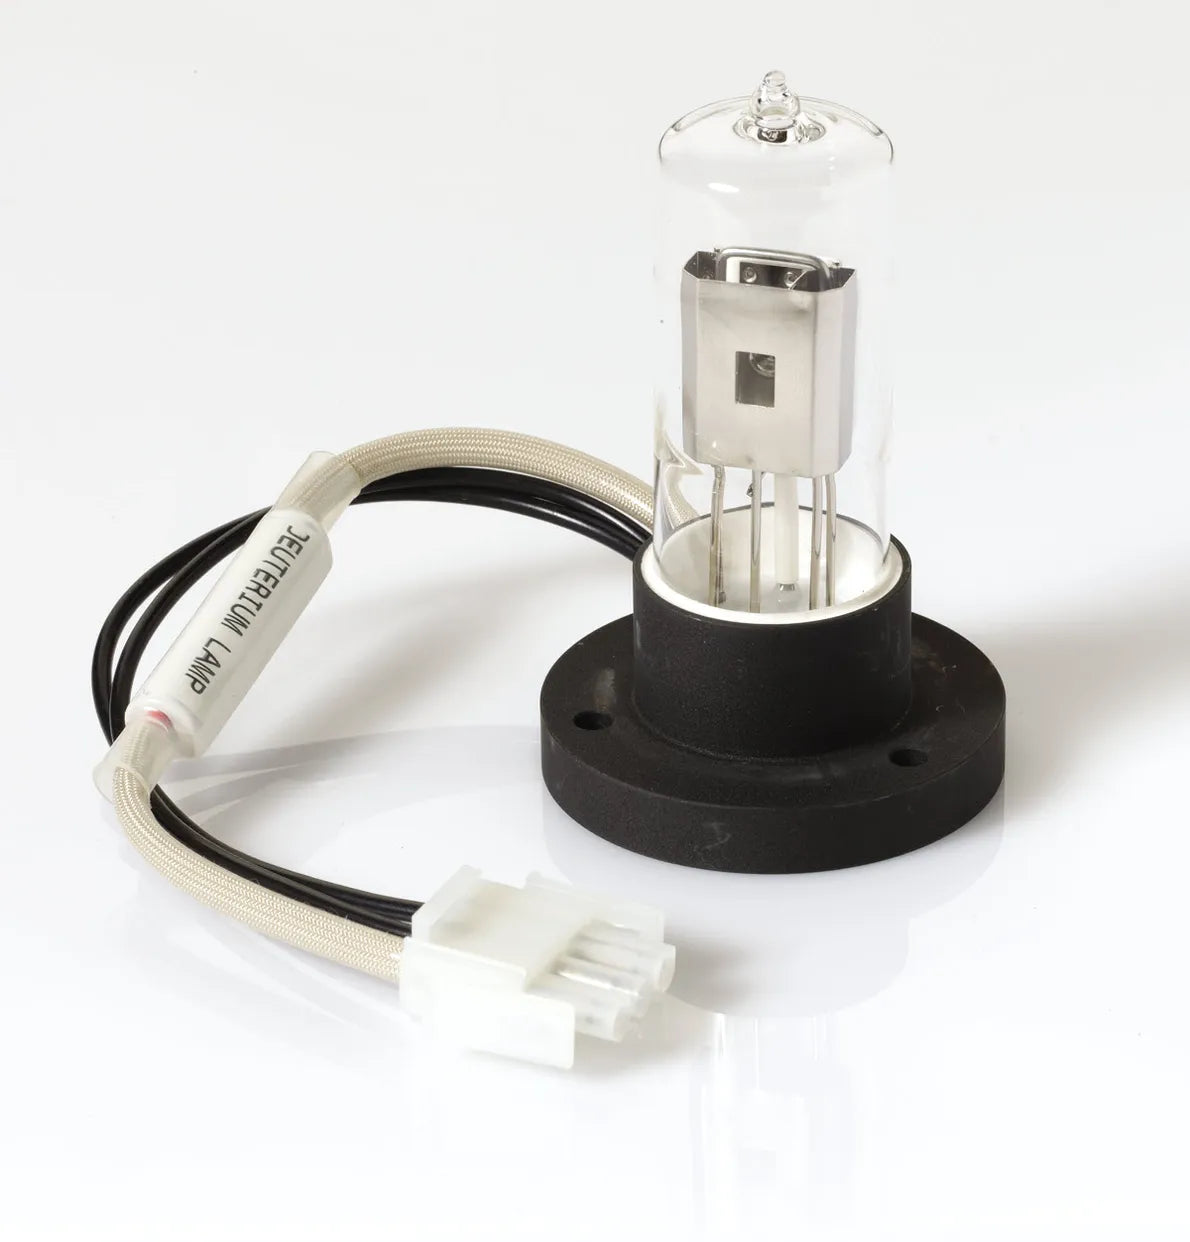 Deuterium Lamp, Long Life (2000 hr), Comparable to Waters # 700000356